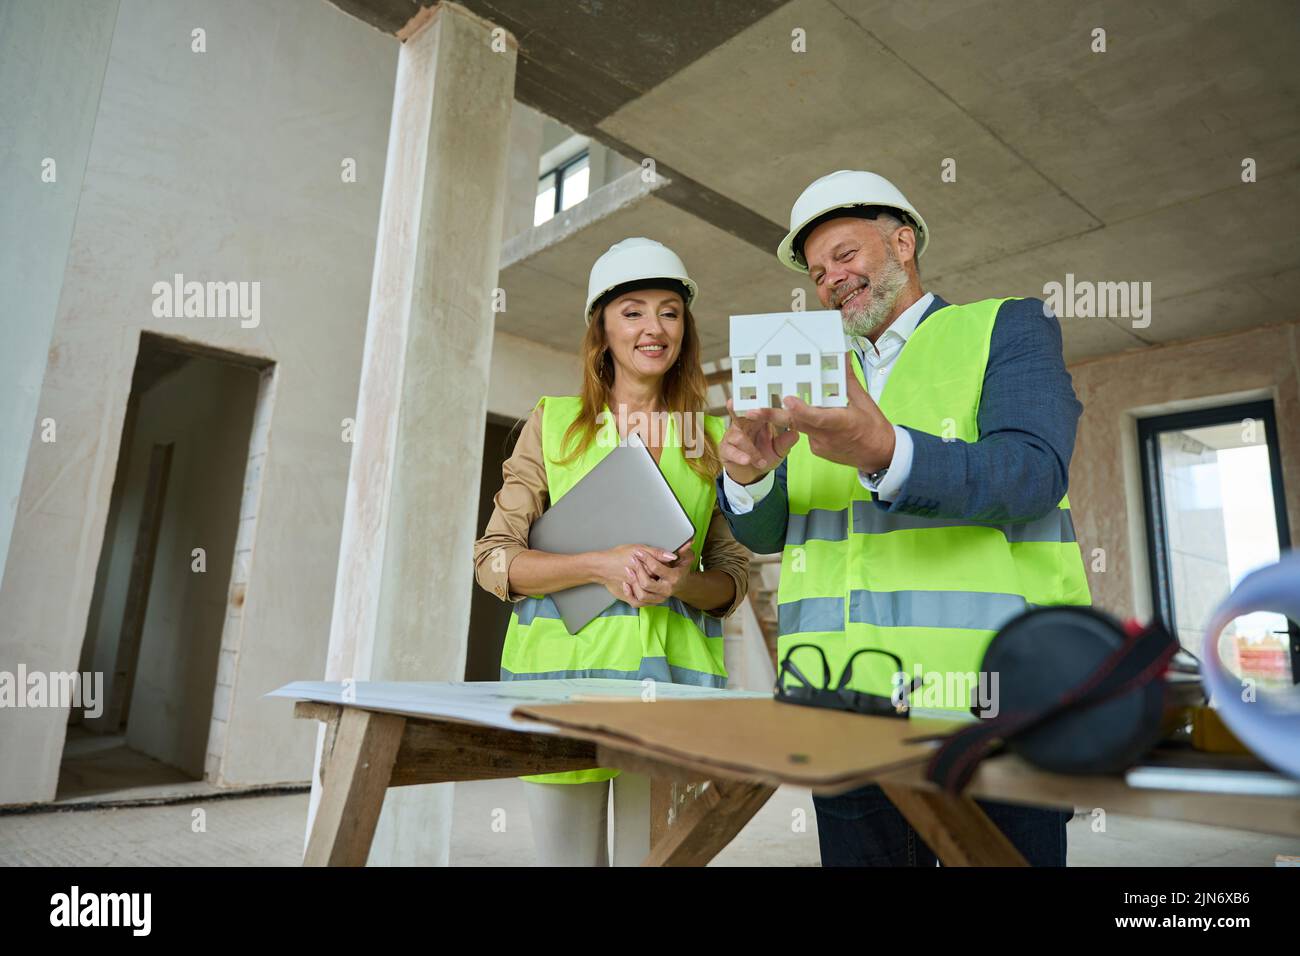 Joyful foreman showing realtor with laptop in hand miniature house Stock Photo